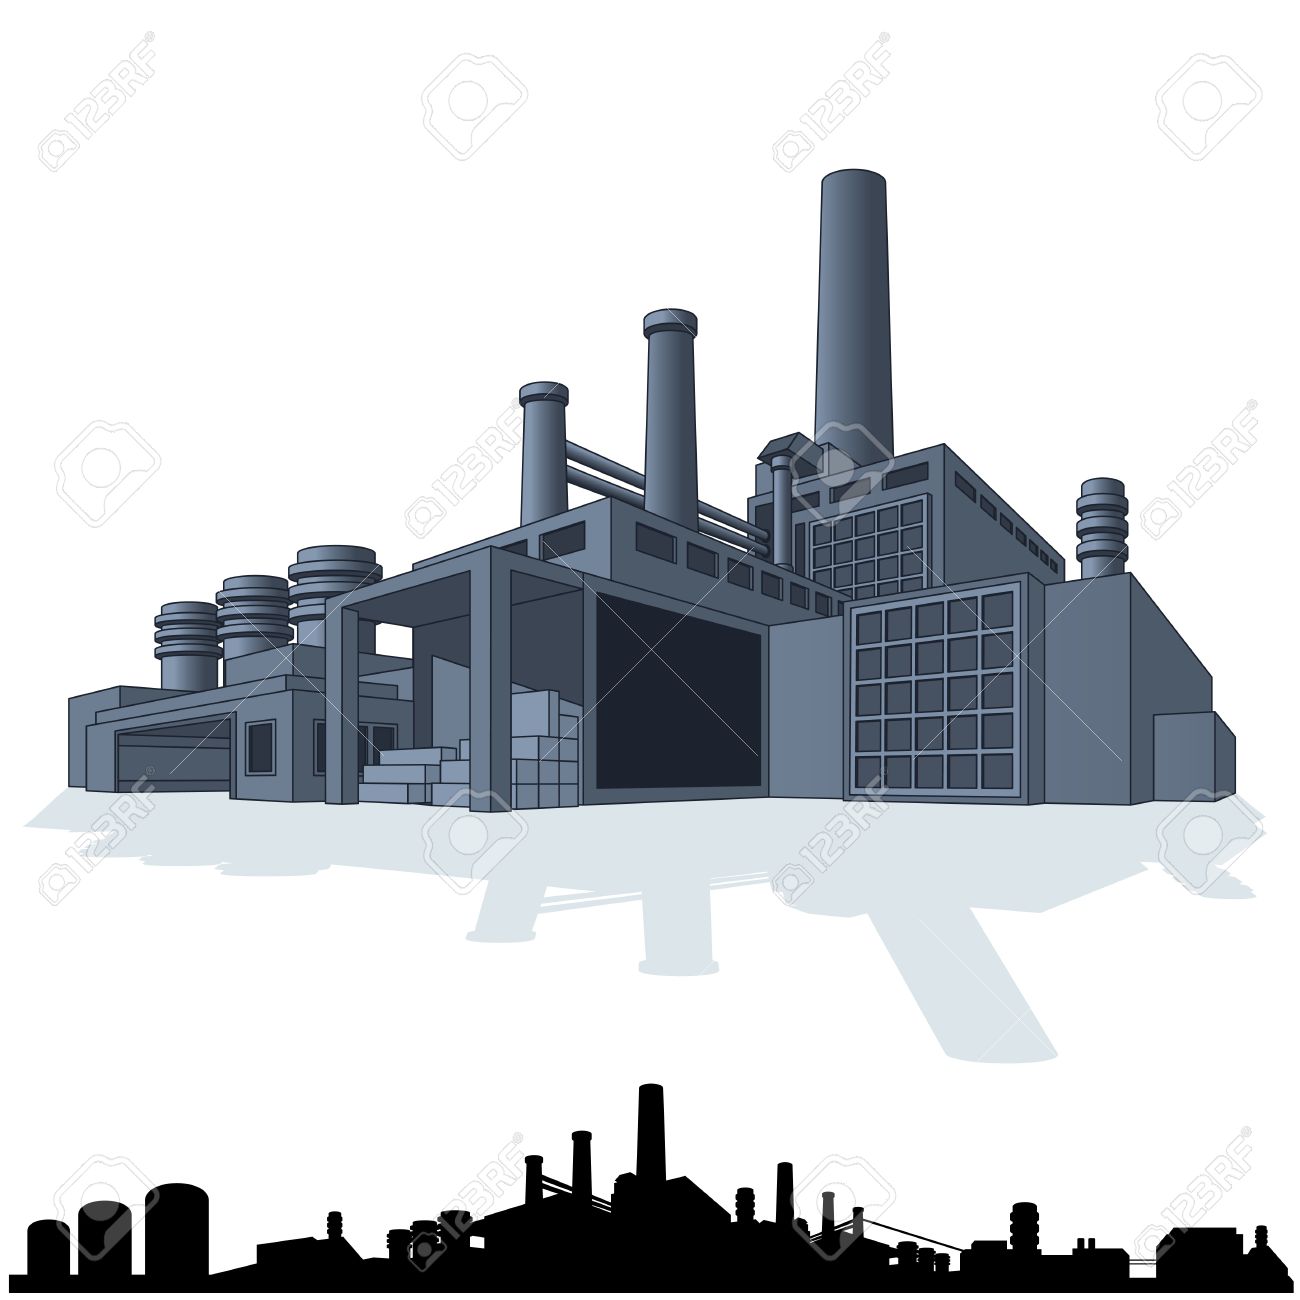 factory clipart sugar industry